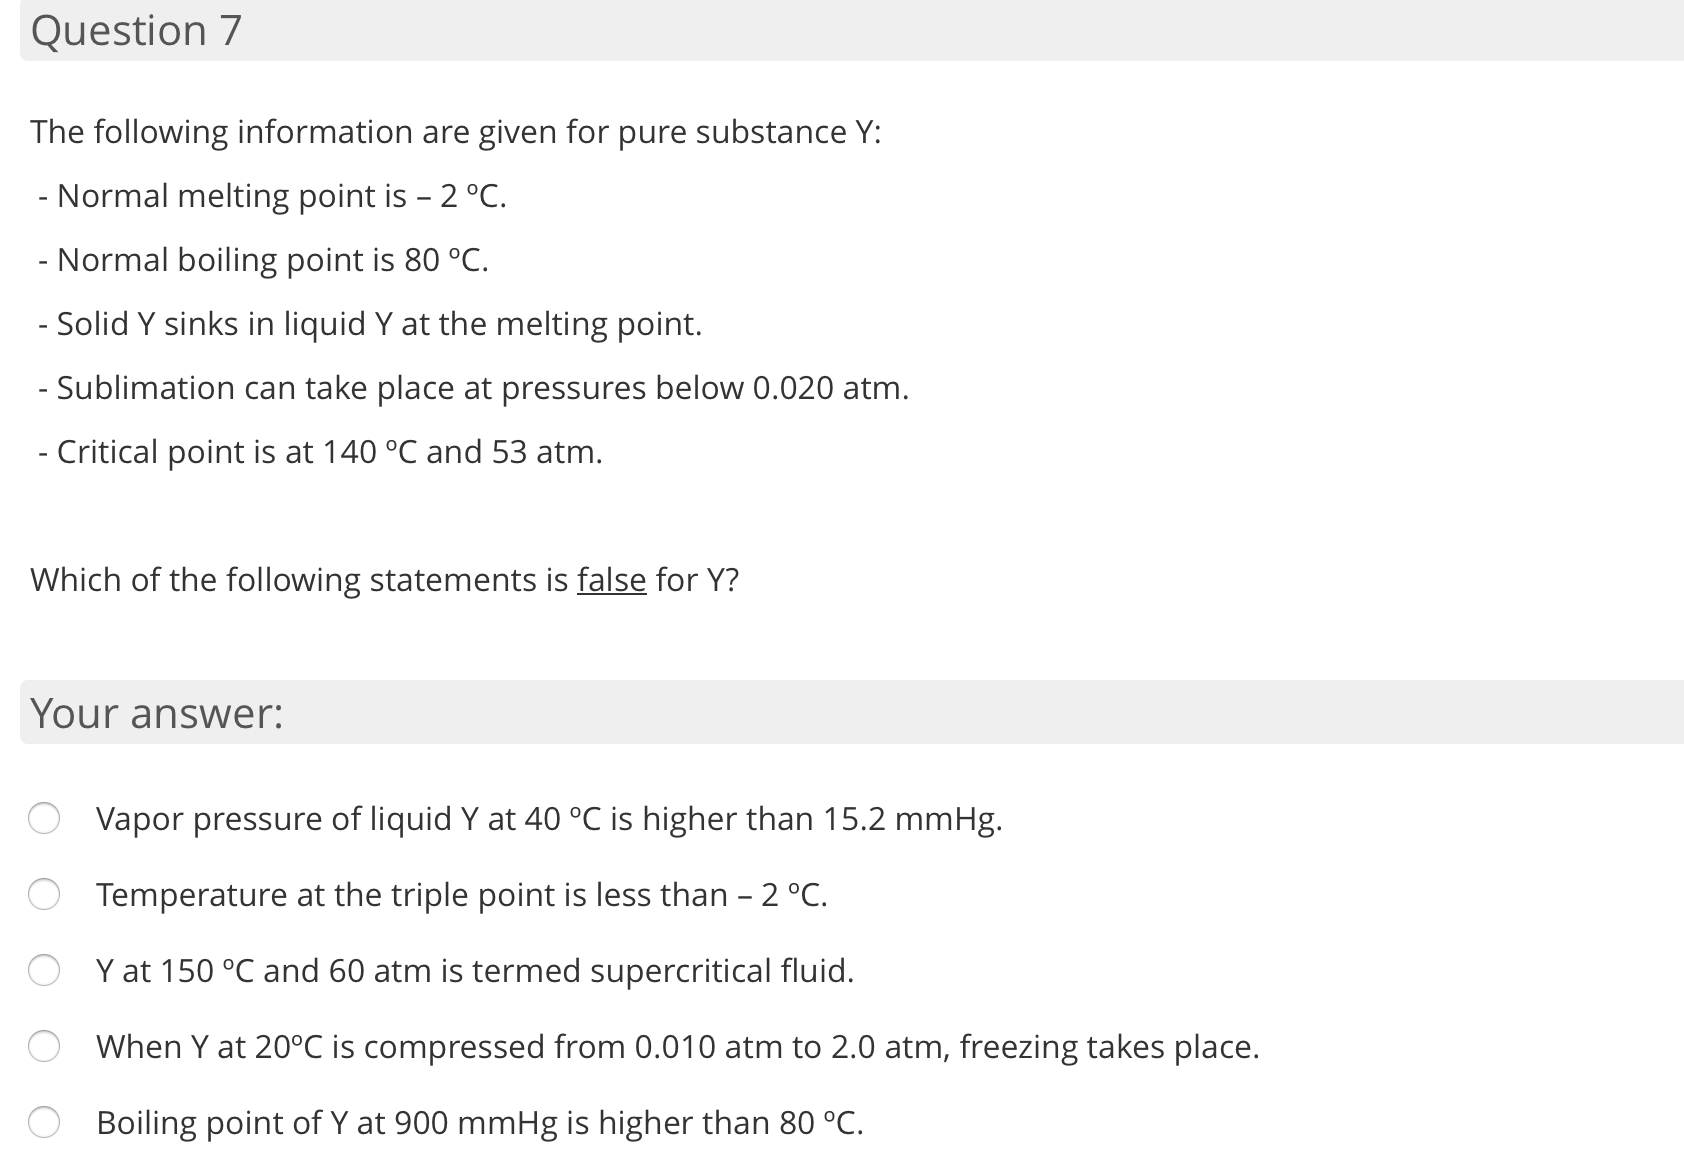 The following information are given for pure substance Y:
- Normal melting point is - 2 °C.
- Normal boiling point is 80 °C.
- Solid Y sinks in liquid Y at the melting point.
- Sublimation can take place at pressures below 0.020 atm.
- Critical point is at 140 °C and 53 atm.
Which of the following statements is false for Y?
Your answer:
Vapor pressure of liquid Y at 40 °C is higher than 15.2 mmHg.
Temperature at the triple point is less than - 2 °C.
O Y at 150 °C and 60 atm is termed supercritical fluid.
When Y at 20°C is compressed from 0.010 atm to 2.0 atm, freezing takes place.
Boiling point of Y at 900 mmHg is higher than 80 °C.
